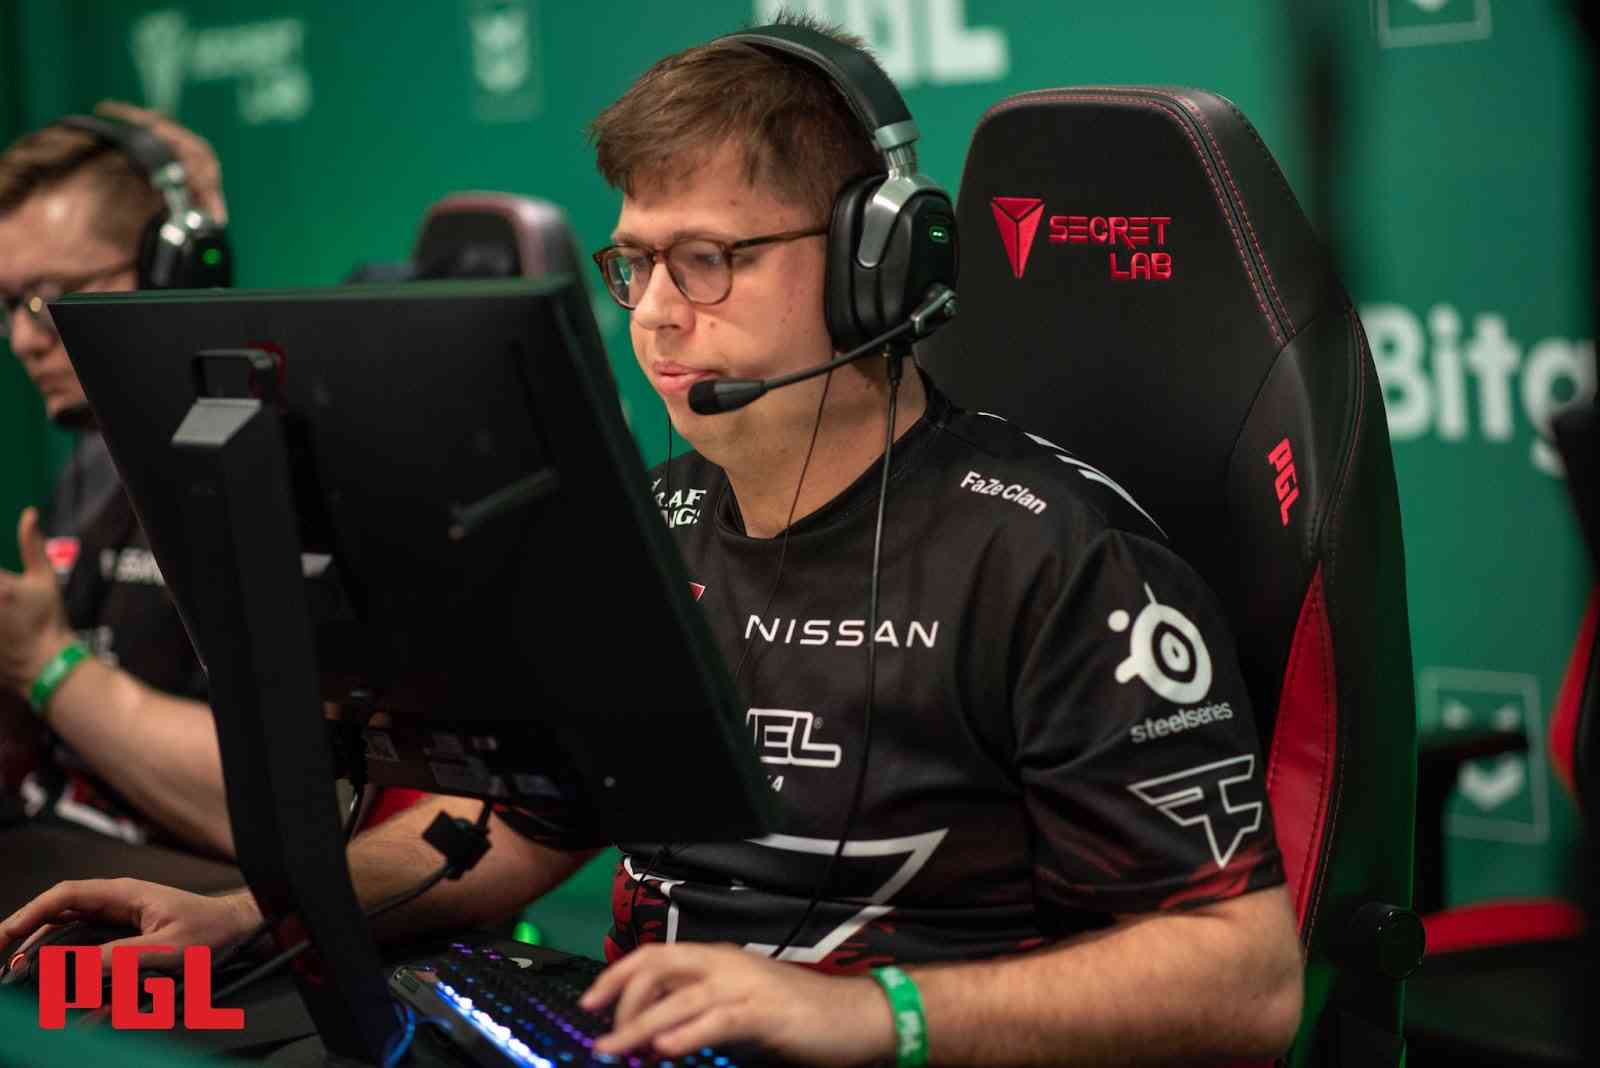 FaZe Clan IGL, Finn "karrigan" Andersen, competes with his team in a live match of CS:GO